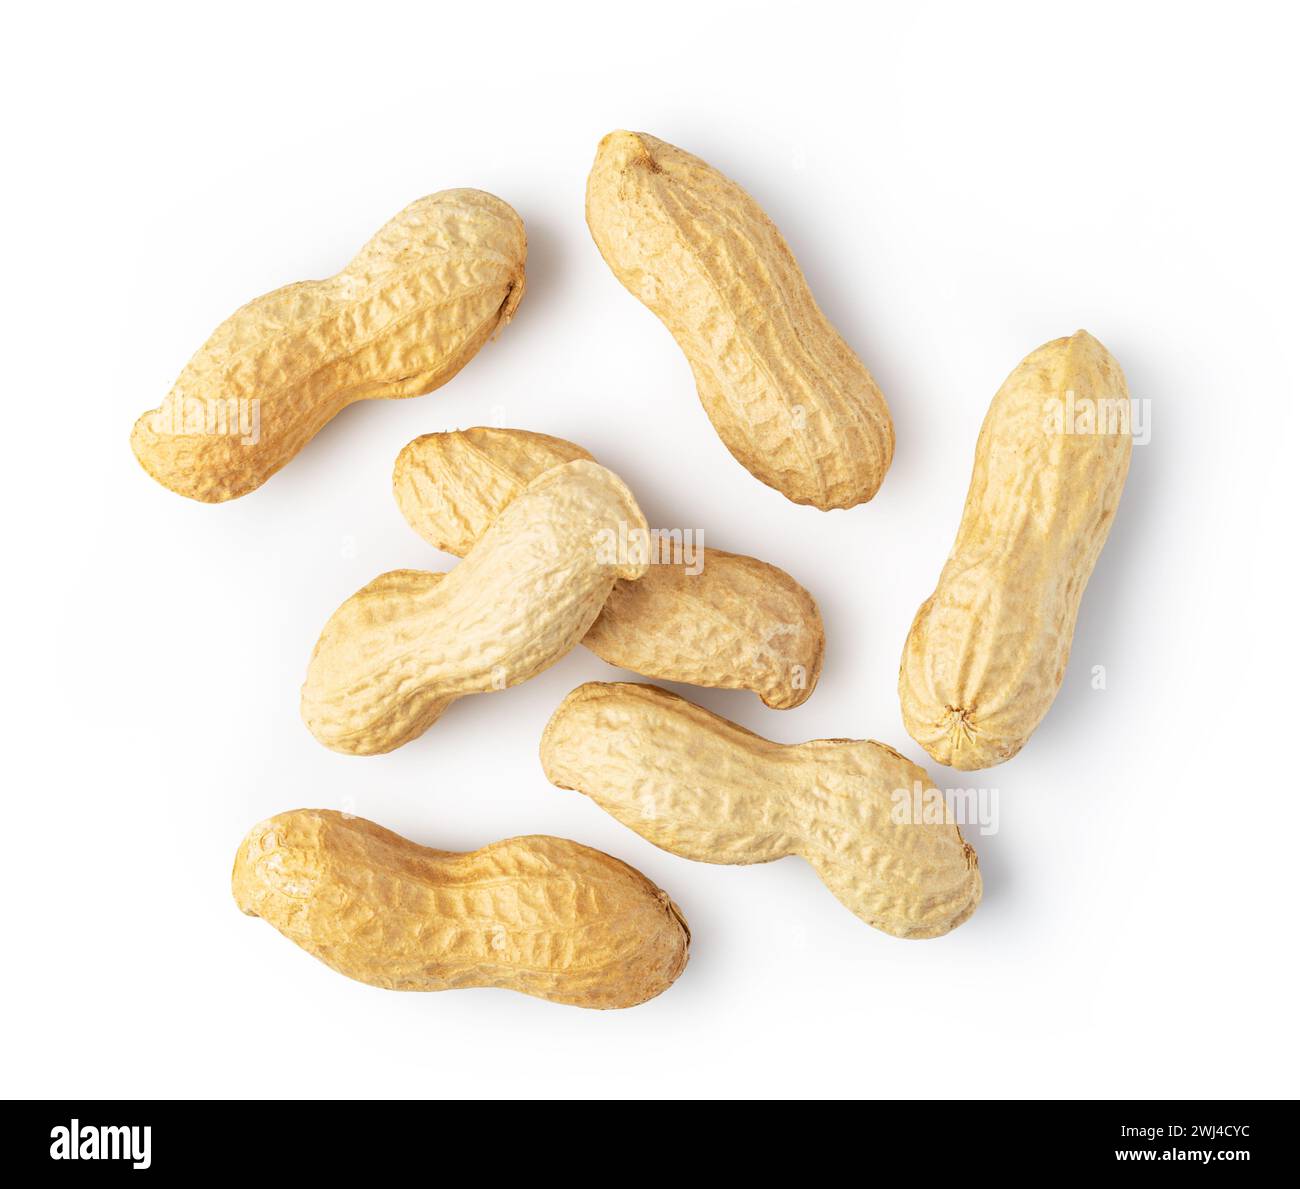 Peanuts on a white background Stock Photo